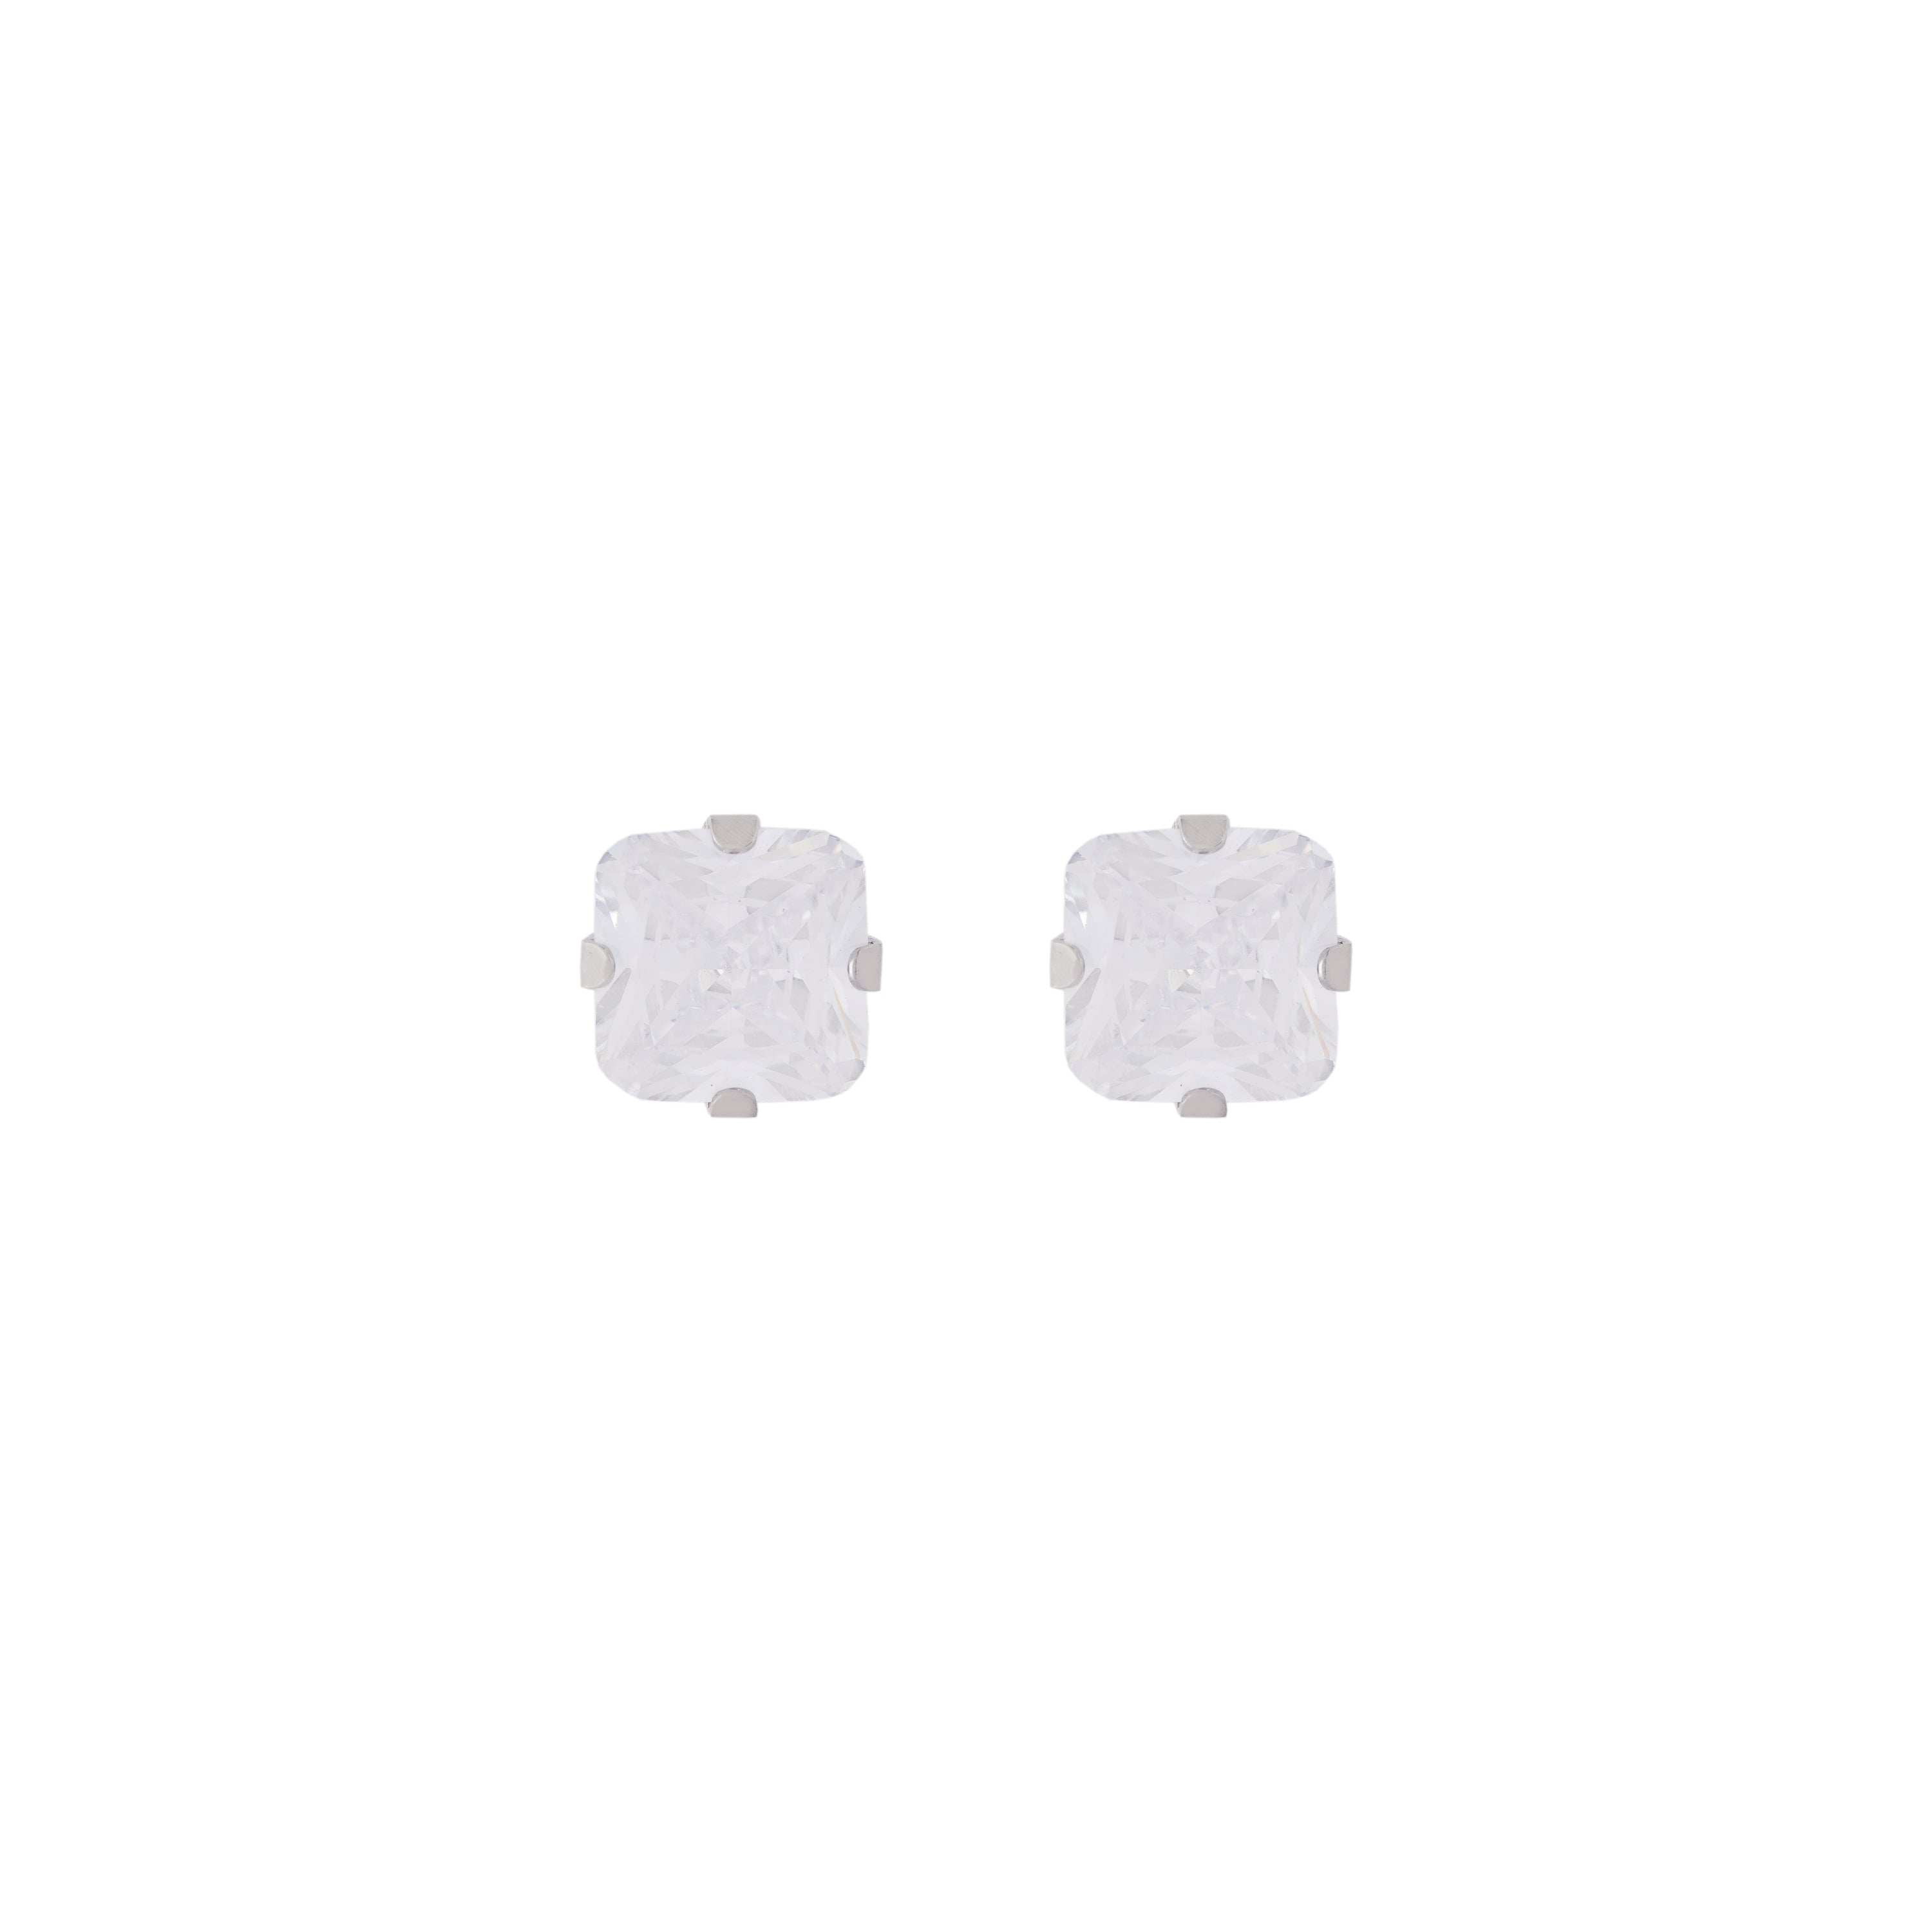 6X6MM Cubic Zirconia Allergy free Stainless Steel Ear Studs | MADE IN USA | Ideal for everyday wear